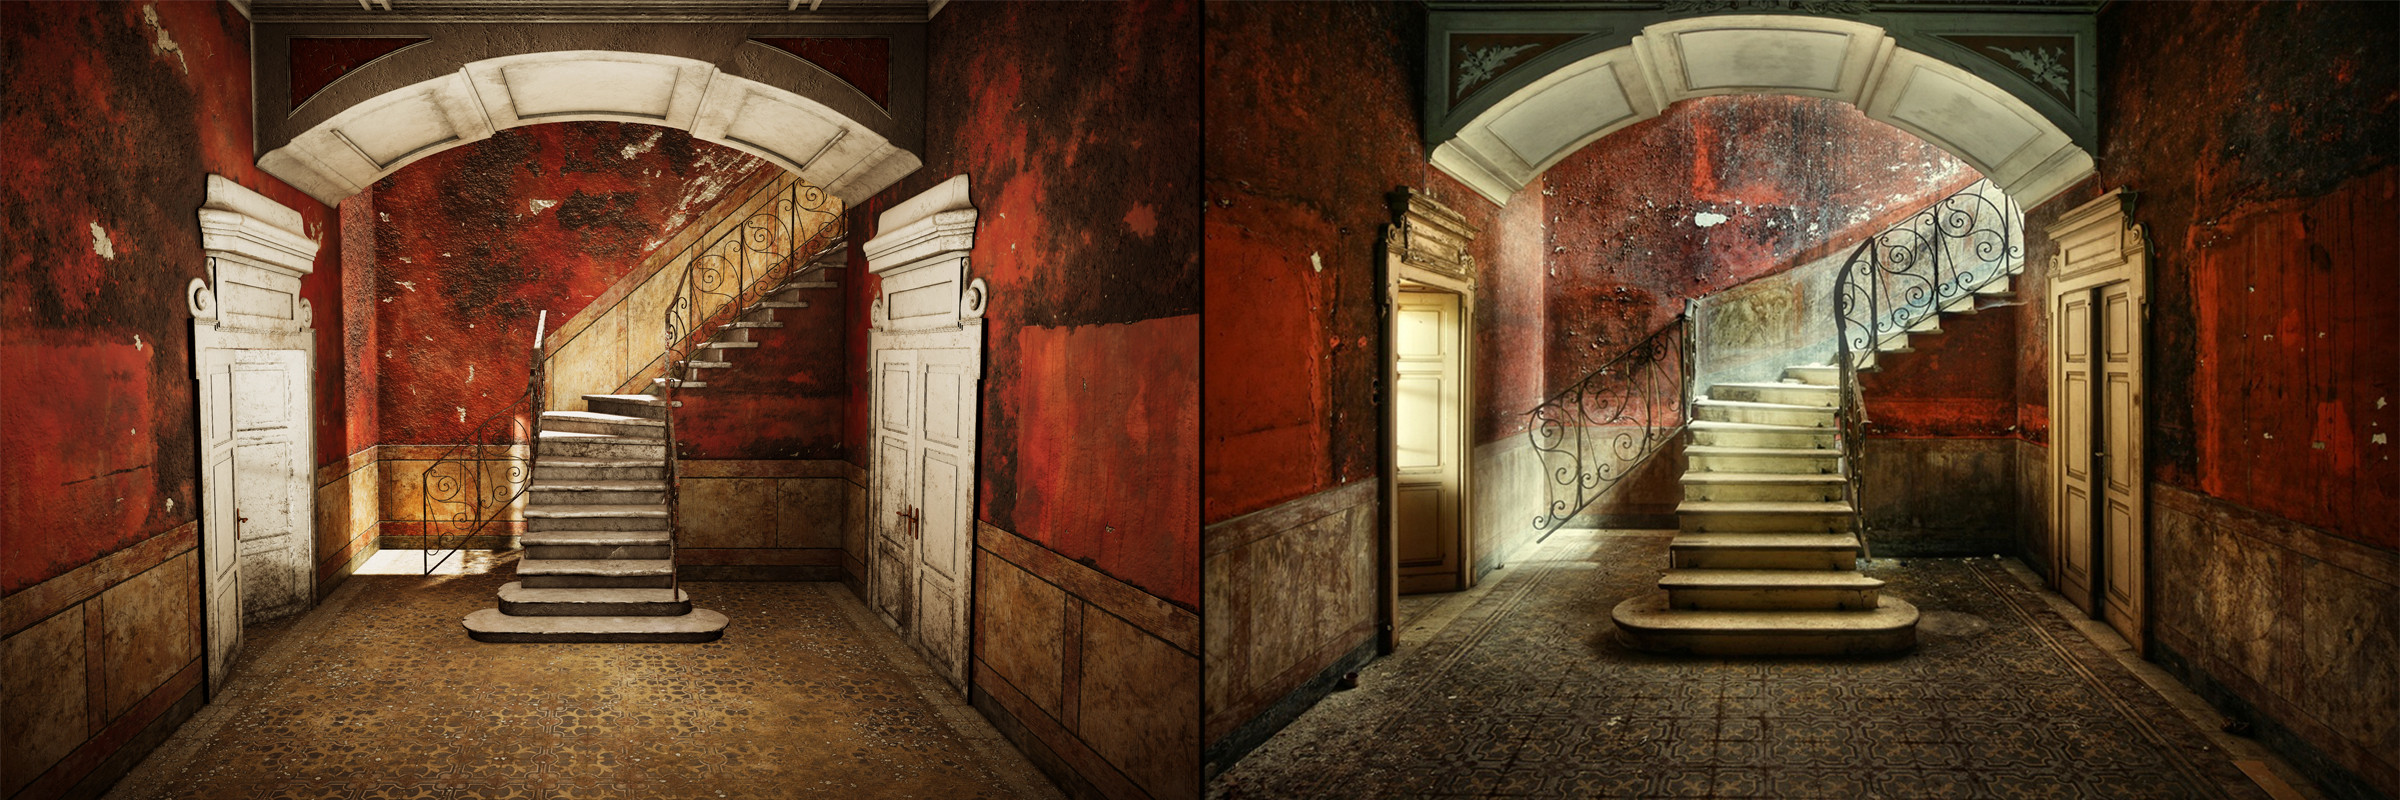 Comparision between final shot (left) and reference picture (right)